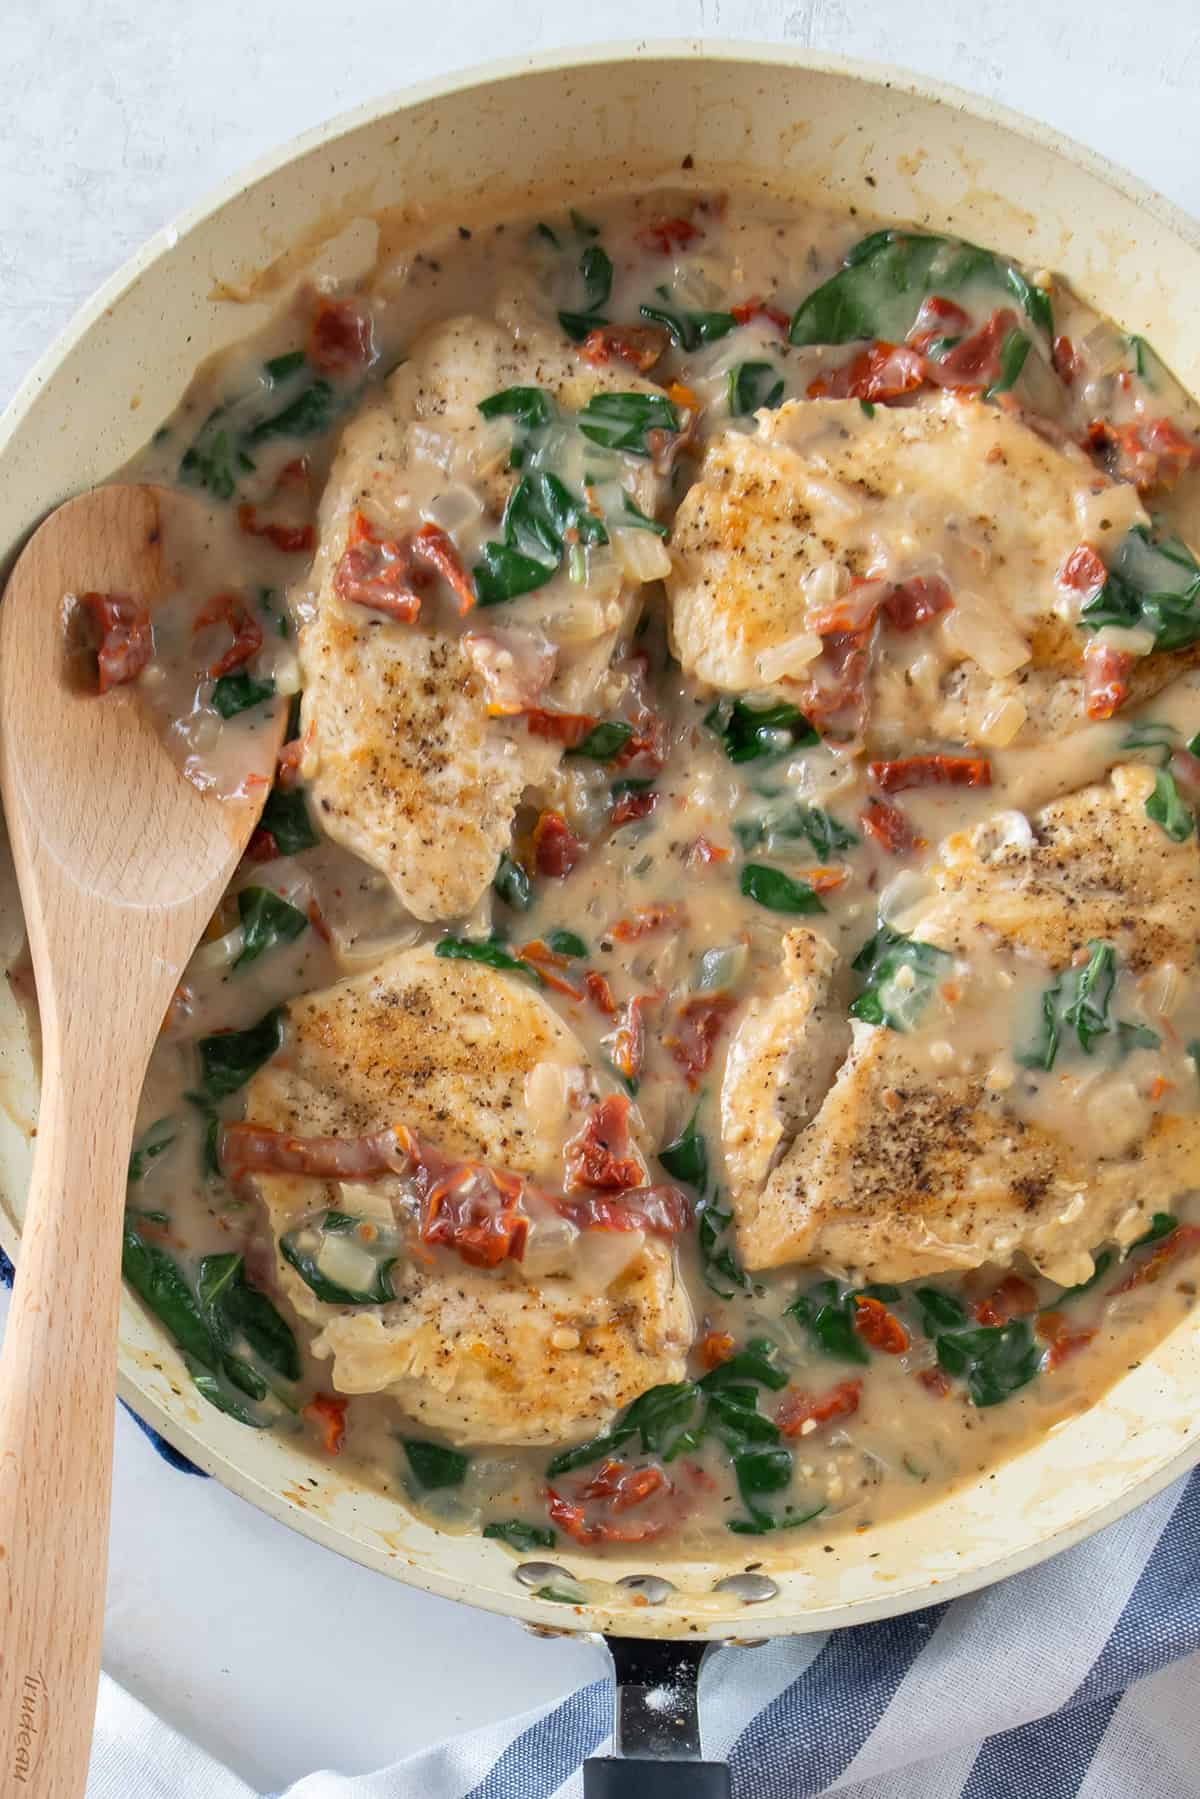 Creamy Tuscan Chicken Recipe with Coconut Milk in a creamy garlic sauce. Spinach, seasoned chicken and sun-dried tomatoes in the pan.